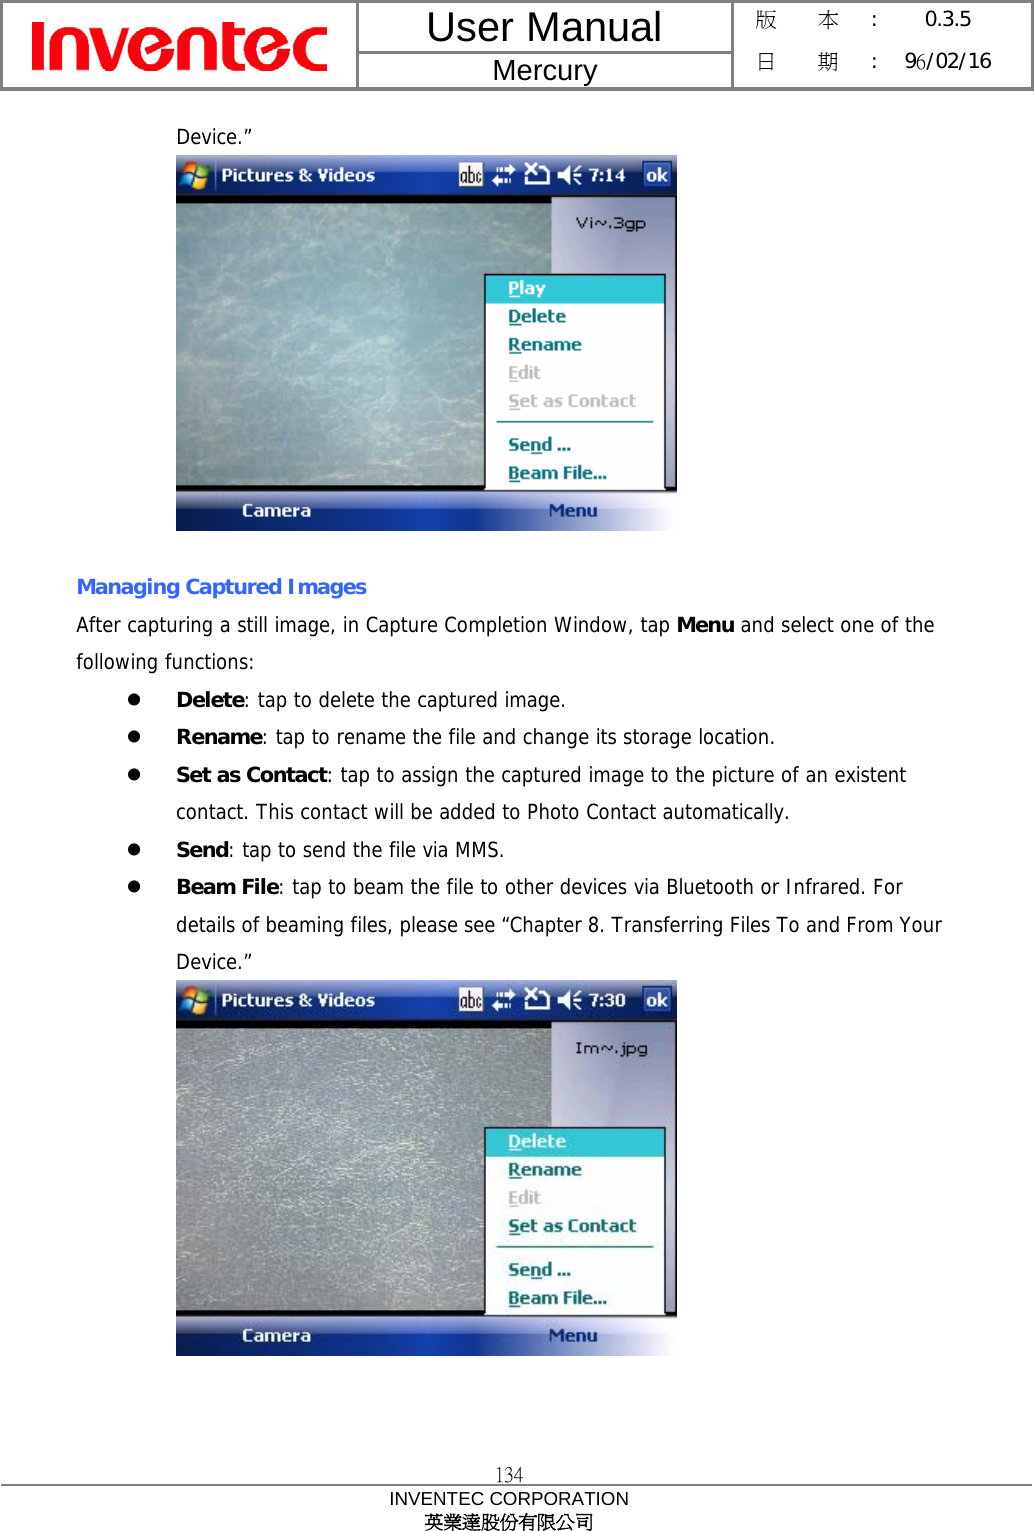 User Manual  Mercury 版    本 :  0.3.5 日    期 : 96/02/16  134 INVENTEC CORPORATION 英業達股份有限公司  Device.”   Managing Captured Images After capturing a still image, in Capture Completion Window, tap Menu and select one of the following functions: z Delete: tap to delete the captured image. z Rename: tap to rename the file and change its storage location. z Set as Contact: tap to assign the captured image to the picture of an existent contact. This contact will be added to Photo Contact automatically. z Send: tap to send the file via MMS. z Beam File: tap to beam the file to other devices via Bluetooth or Infrared. For details of beaming files, please see “Chapter 8. Transferring Files To and From Your Device.”    